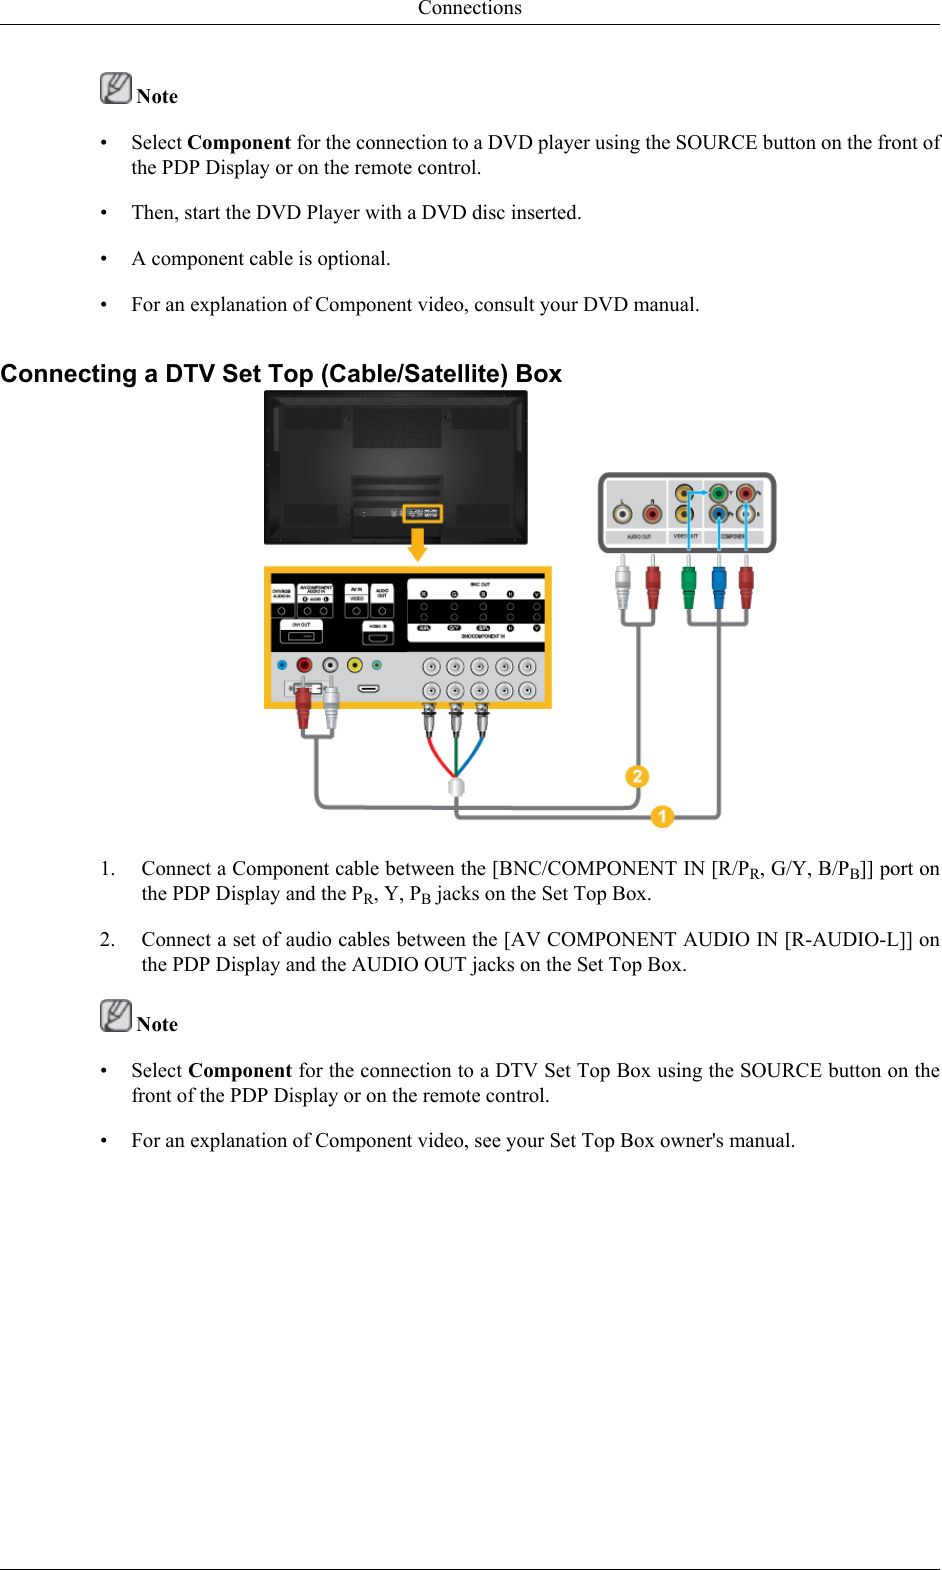  Note• Select Component for the connection to a DVD player using the SOURCE button on the front ofthe PDP Display or on the remote control.• Then, start the DVD Player with a DVD disc inserted.• A component cable is optional.• For an explanation of Component video, consult your DVD manual.Connecting a DTV Set Top (Cable/Satellite) Box1. Connect a Component cable between the [BNC/COMPONENT IN [R/PR, G/Y, B/PB]] port onthe PDP Display and the PR, Y, PB jacks on the Set Top Box.2. Connect a set of audio cables between the [AV COMPONENT AUDIO IN [R-AUDIO-L]] onthe PDP Display and the AUDIO OUT jacks on the Set Top Box. Note• Select Component for the connection to a DTV Set Top Box using the SOURCE button on thefront of the PDP Display or on the remote control.• For an explanation of Component video, see your Set Top Box owner&apos;s manual.Connections